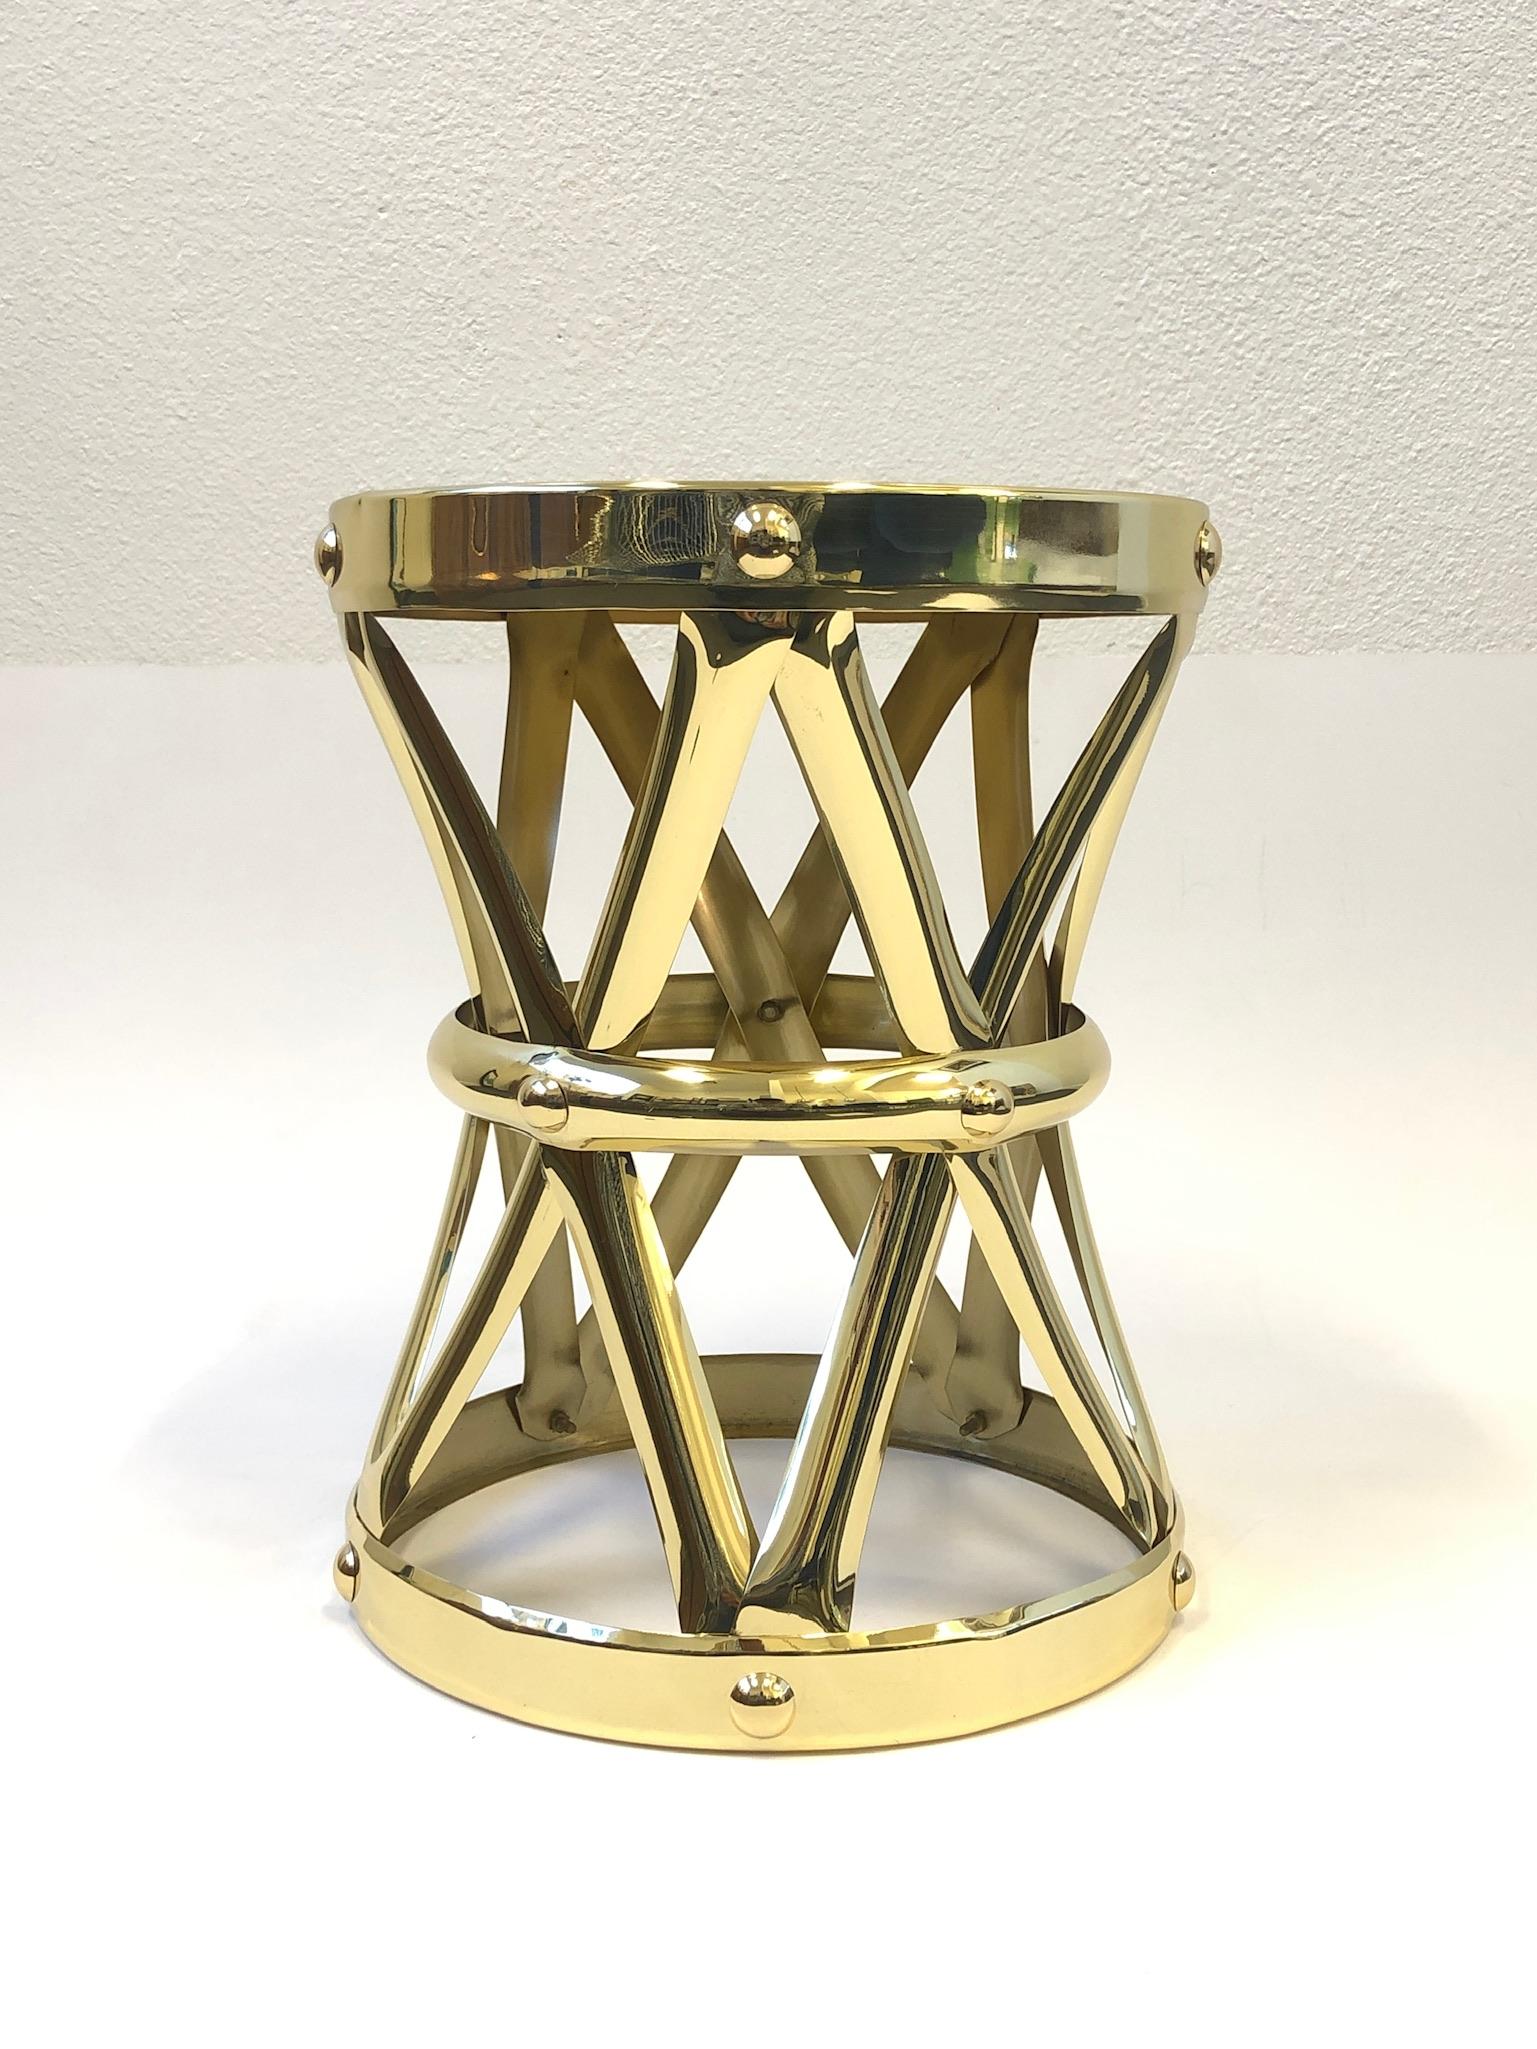 Late 20th Century Spanish Brass Drum Occasional Side Table by Sarreid Ltd.